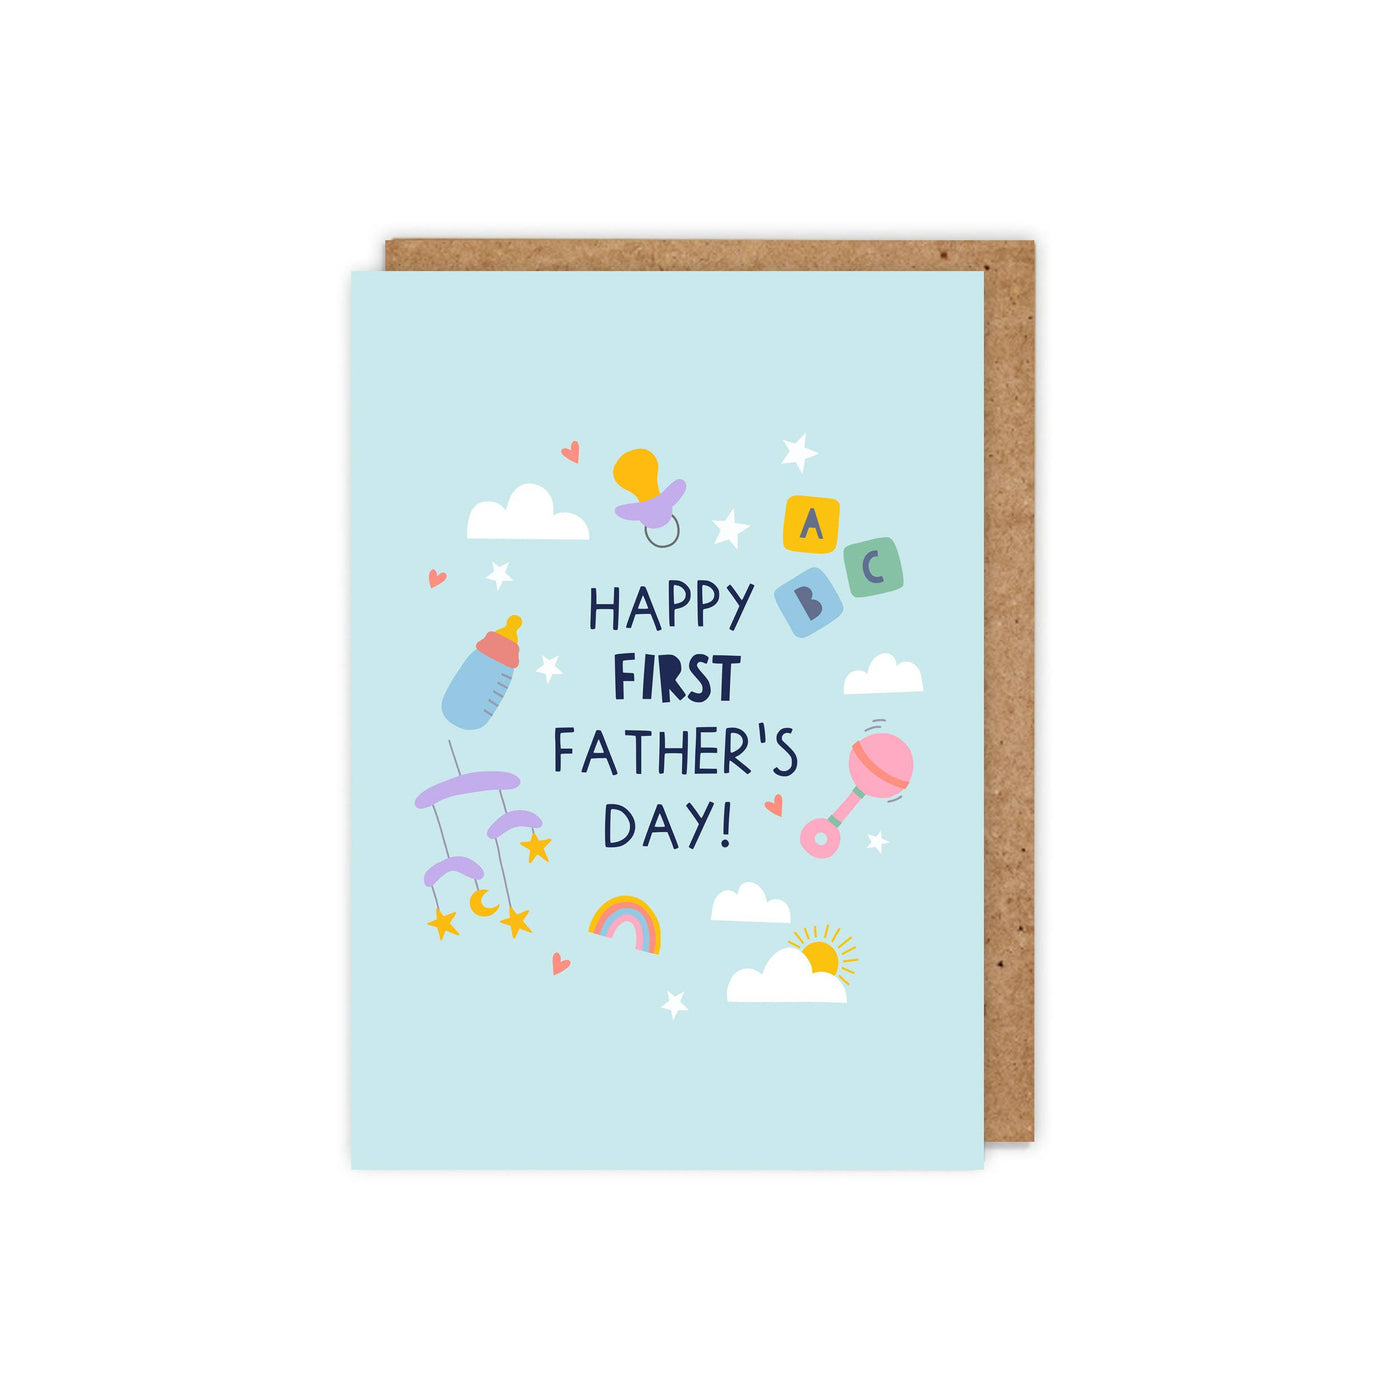 Happy First Father's Day! Father's Day Card